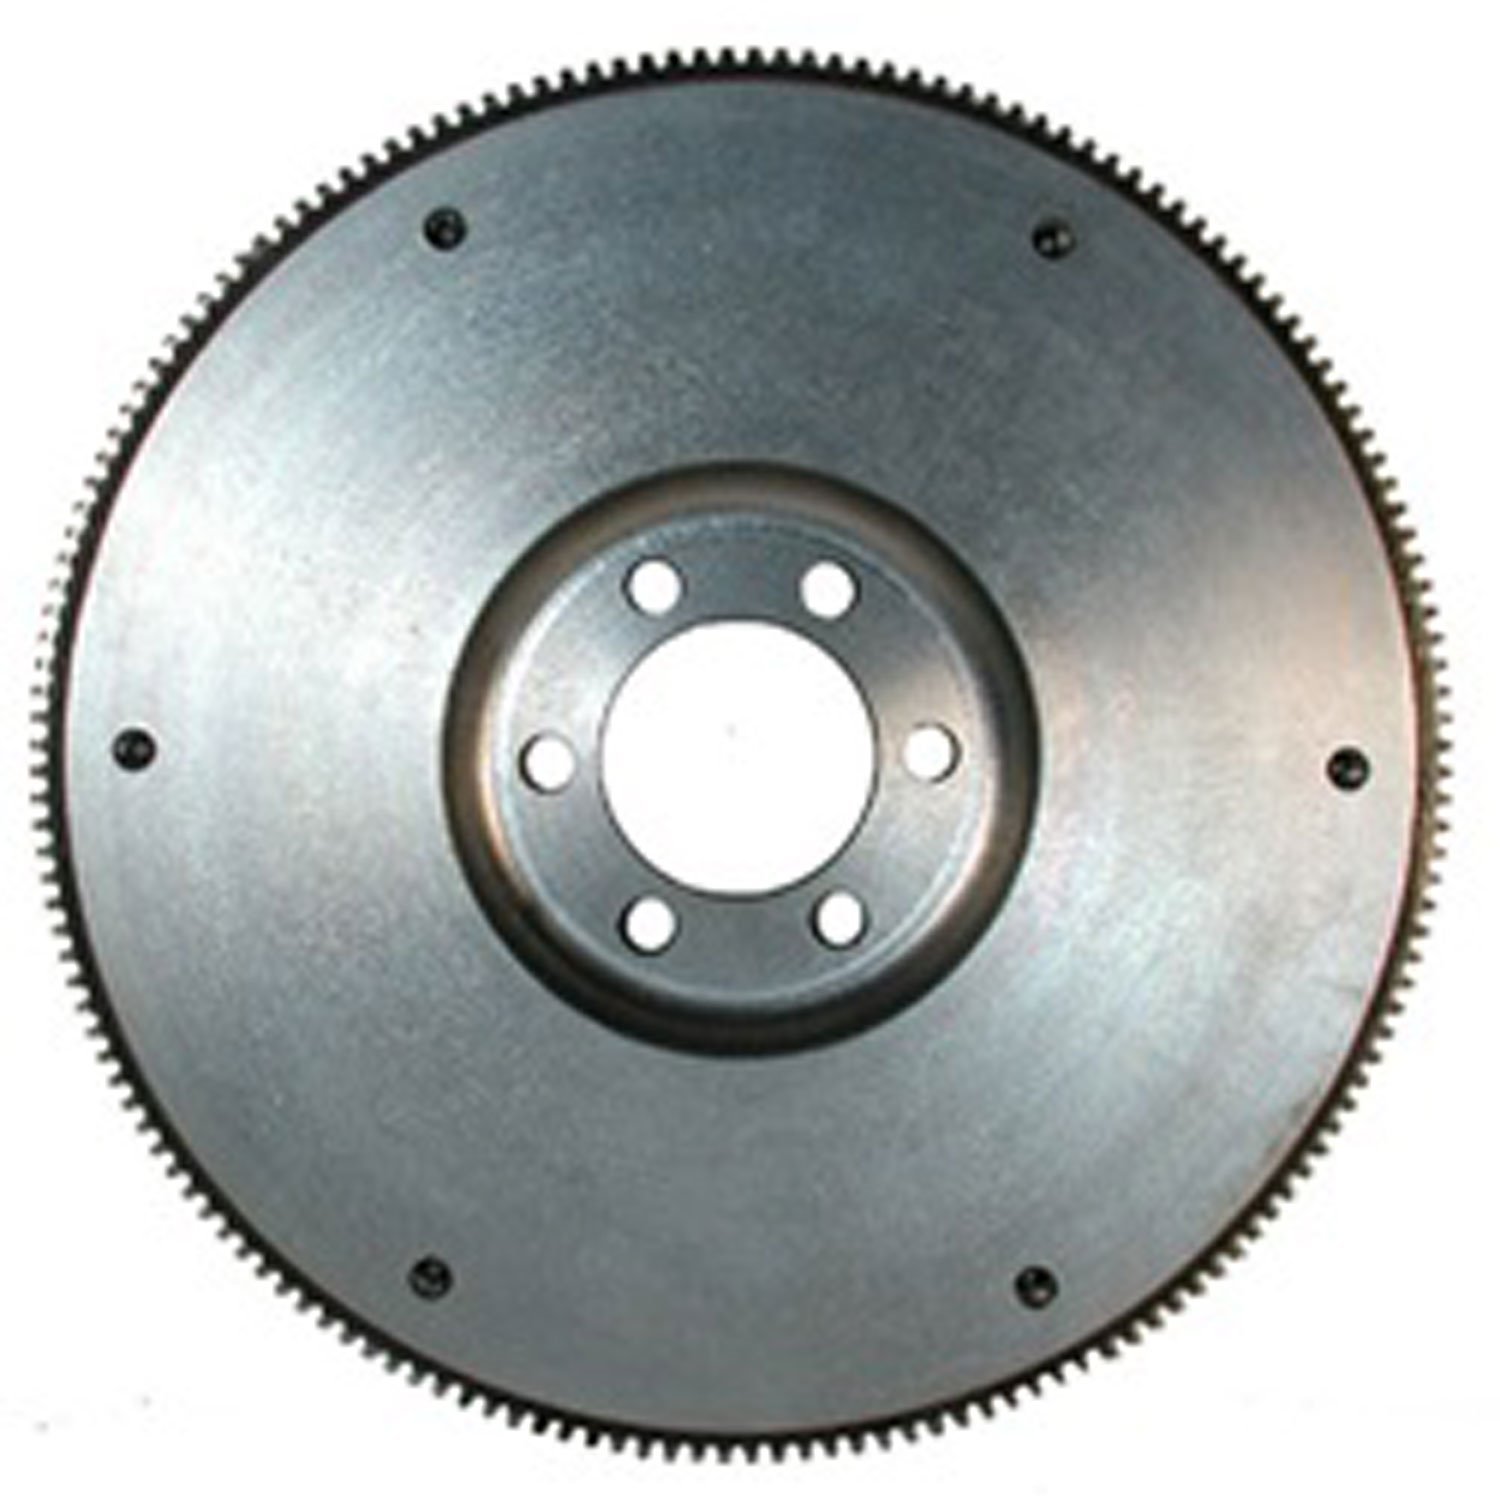 Replacement flywheel from Omix-ADA, Fits 82-87 Jeep models with a 4.2 liter 6-cylinder engine and a manual transmission.